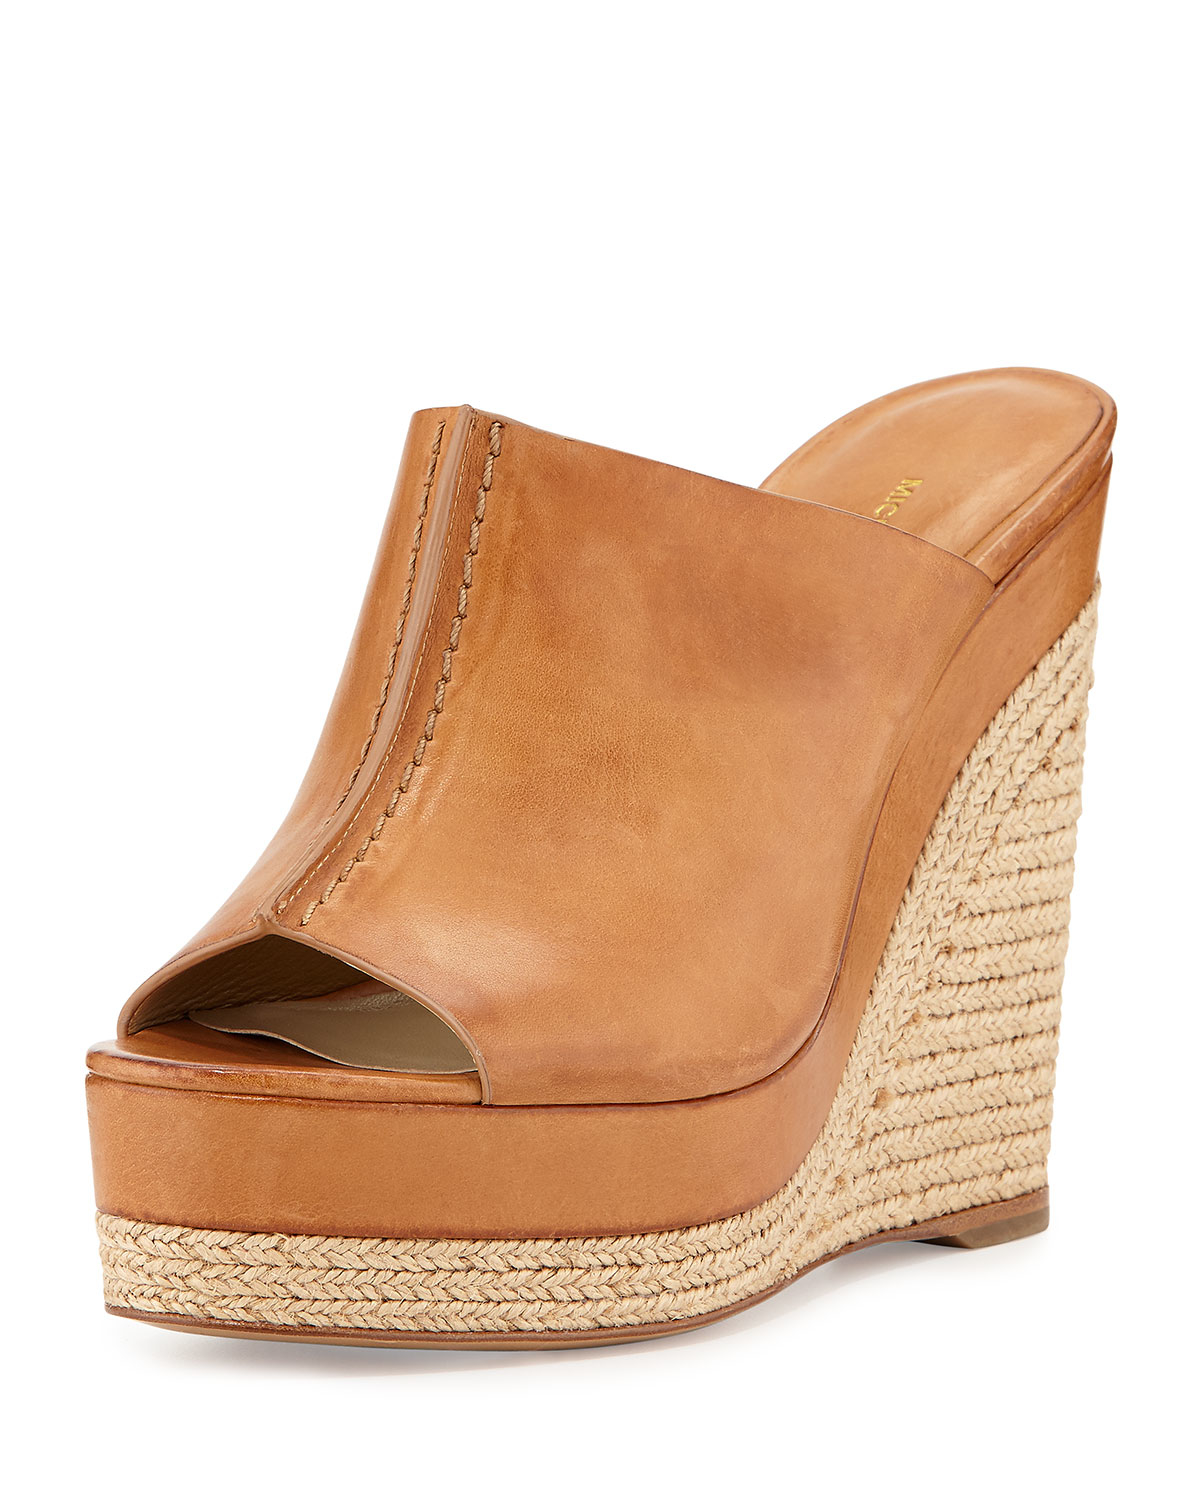 Michael Kors Charlize Leather Wedge 